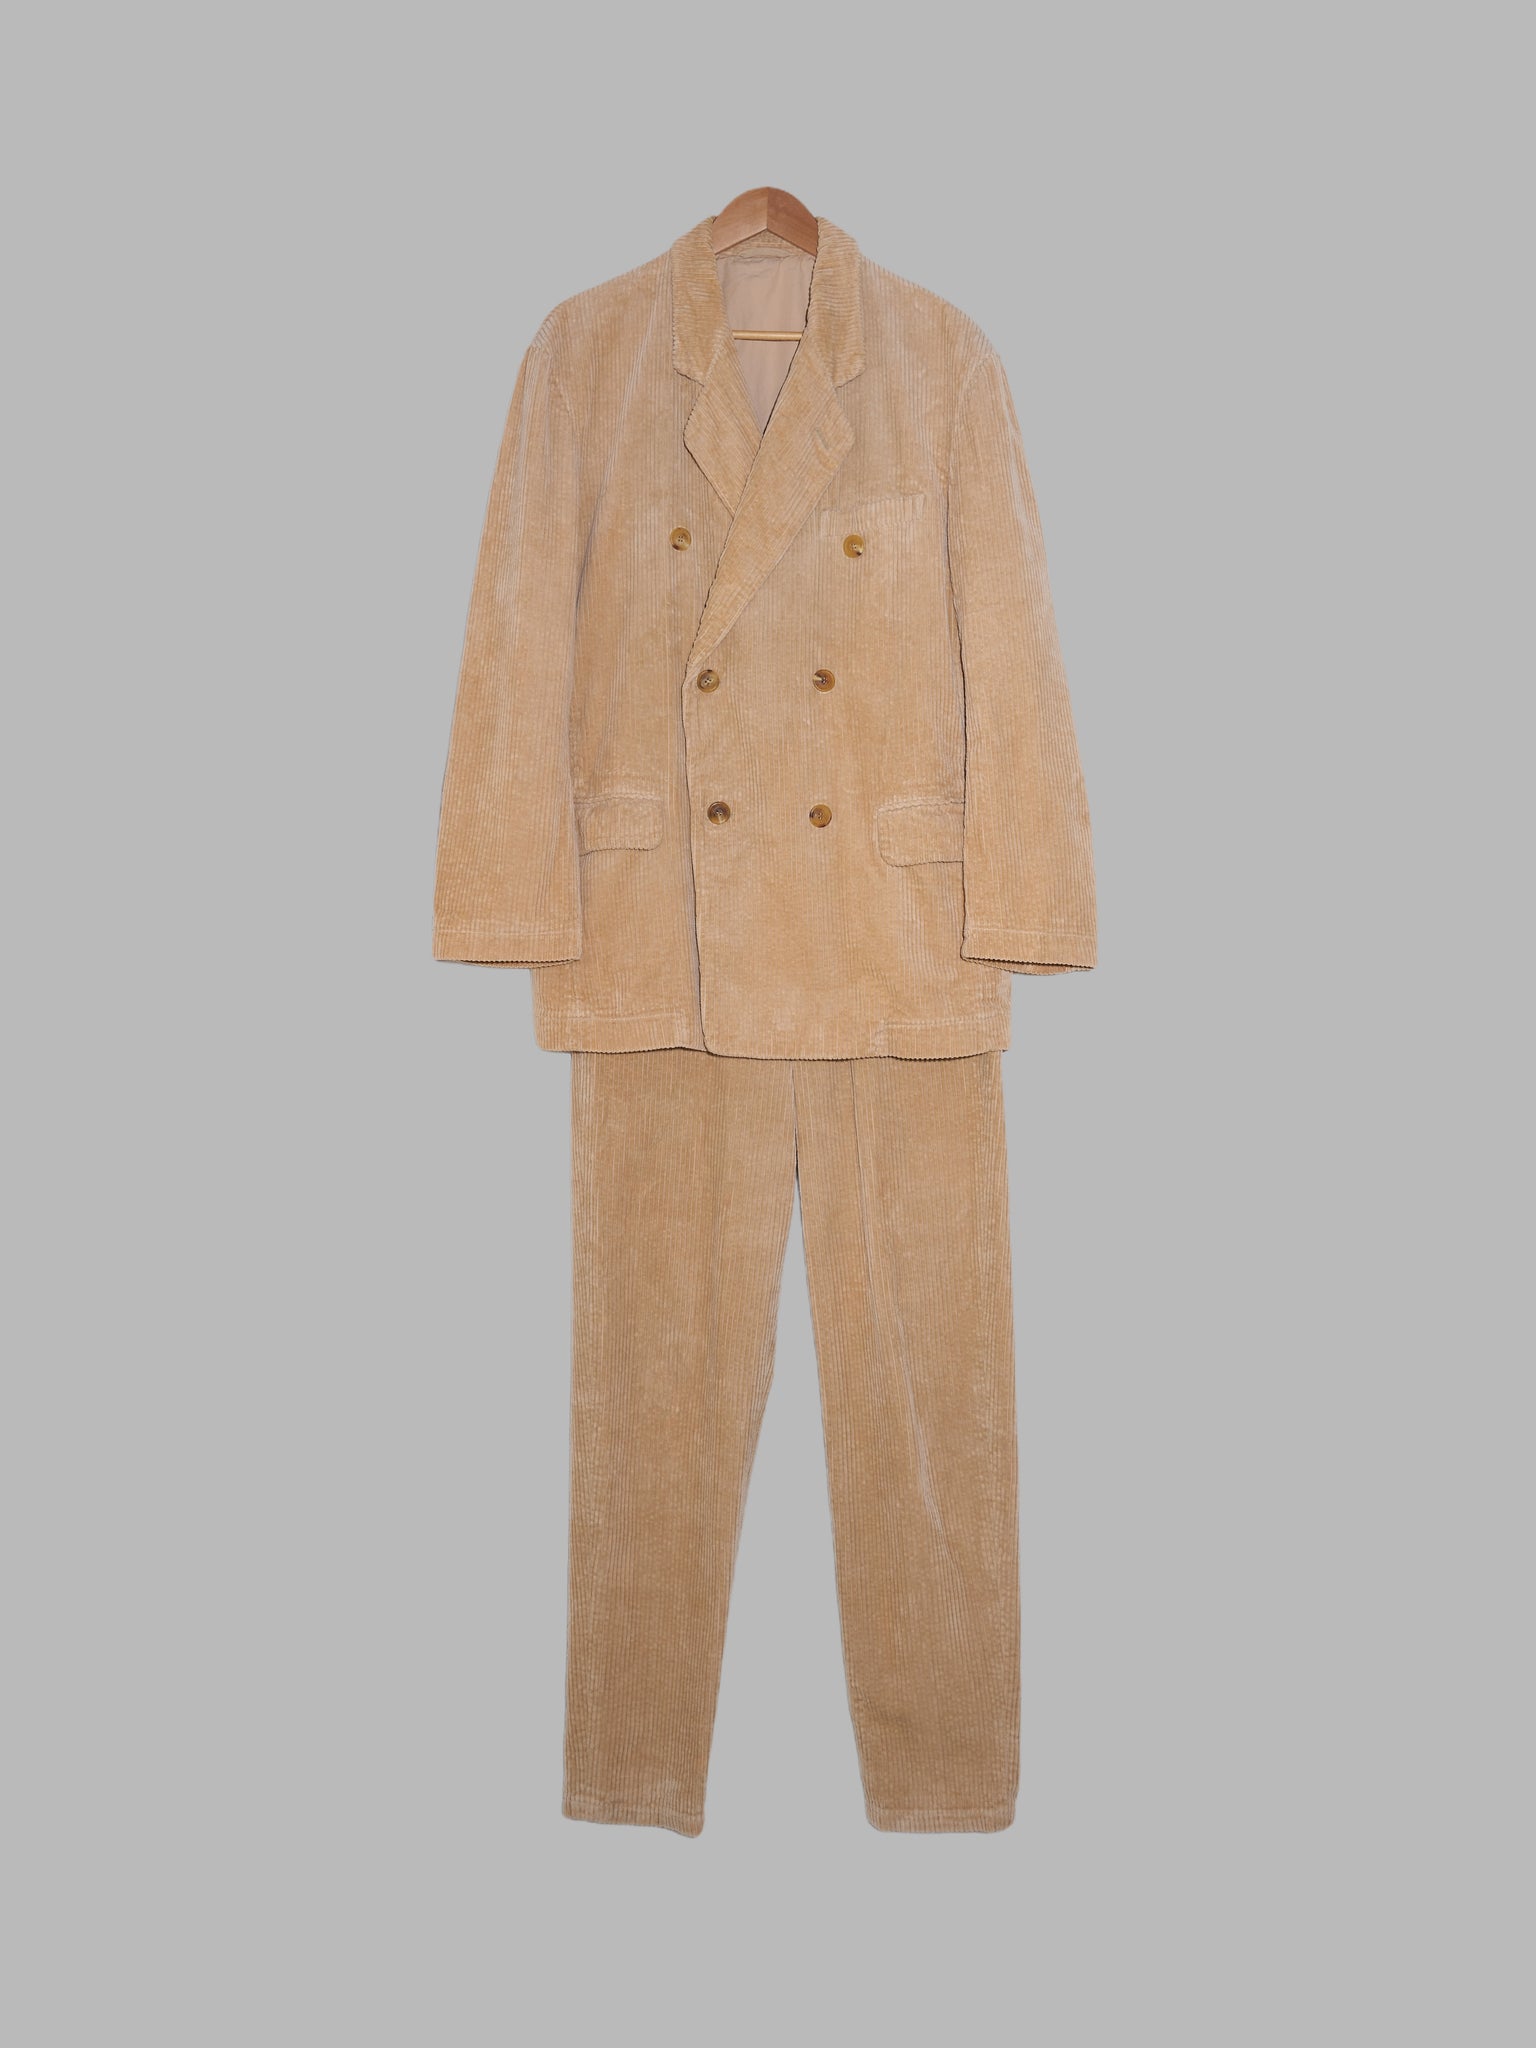 Issey Miyake beige cotton corduroy double breasted blazer and trouser suit - M